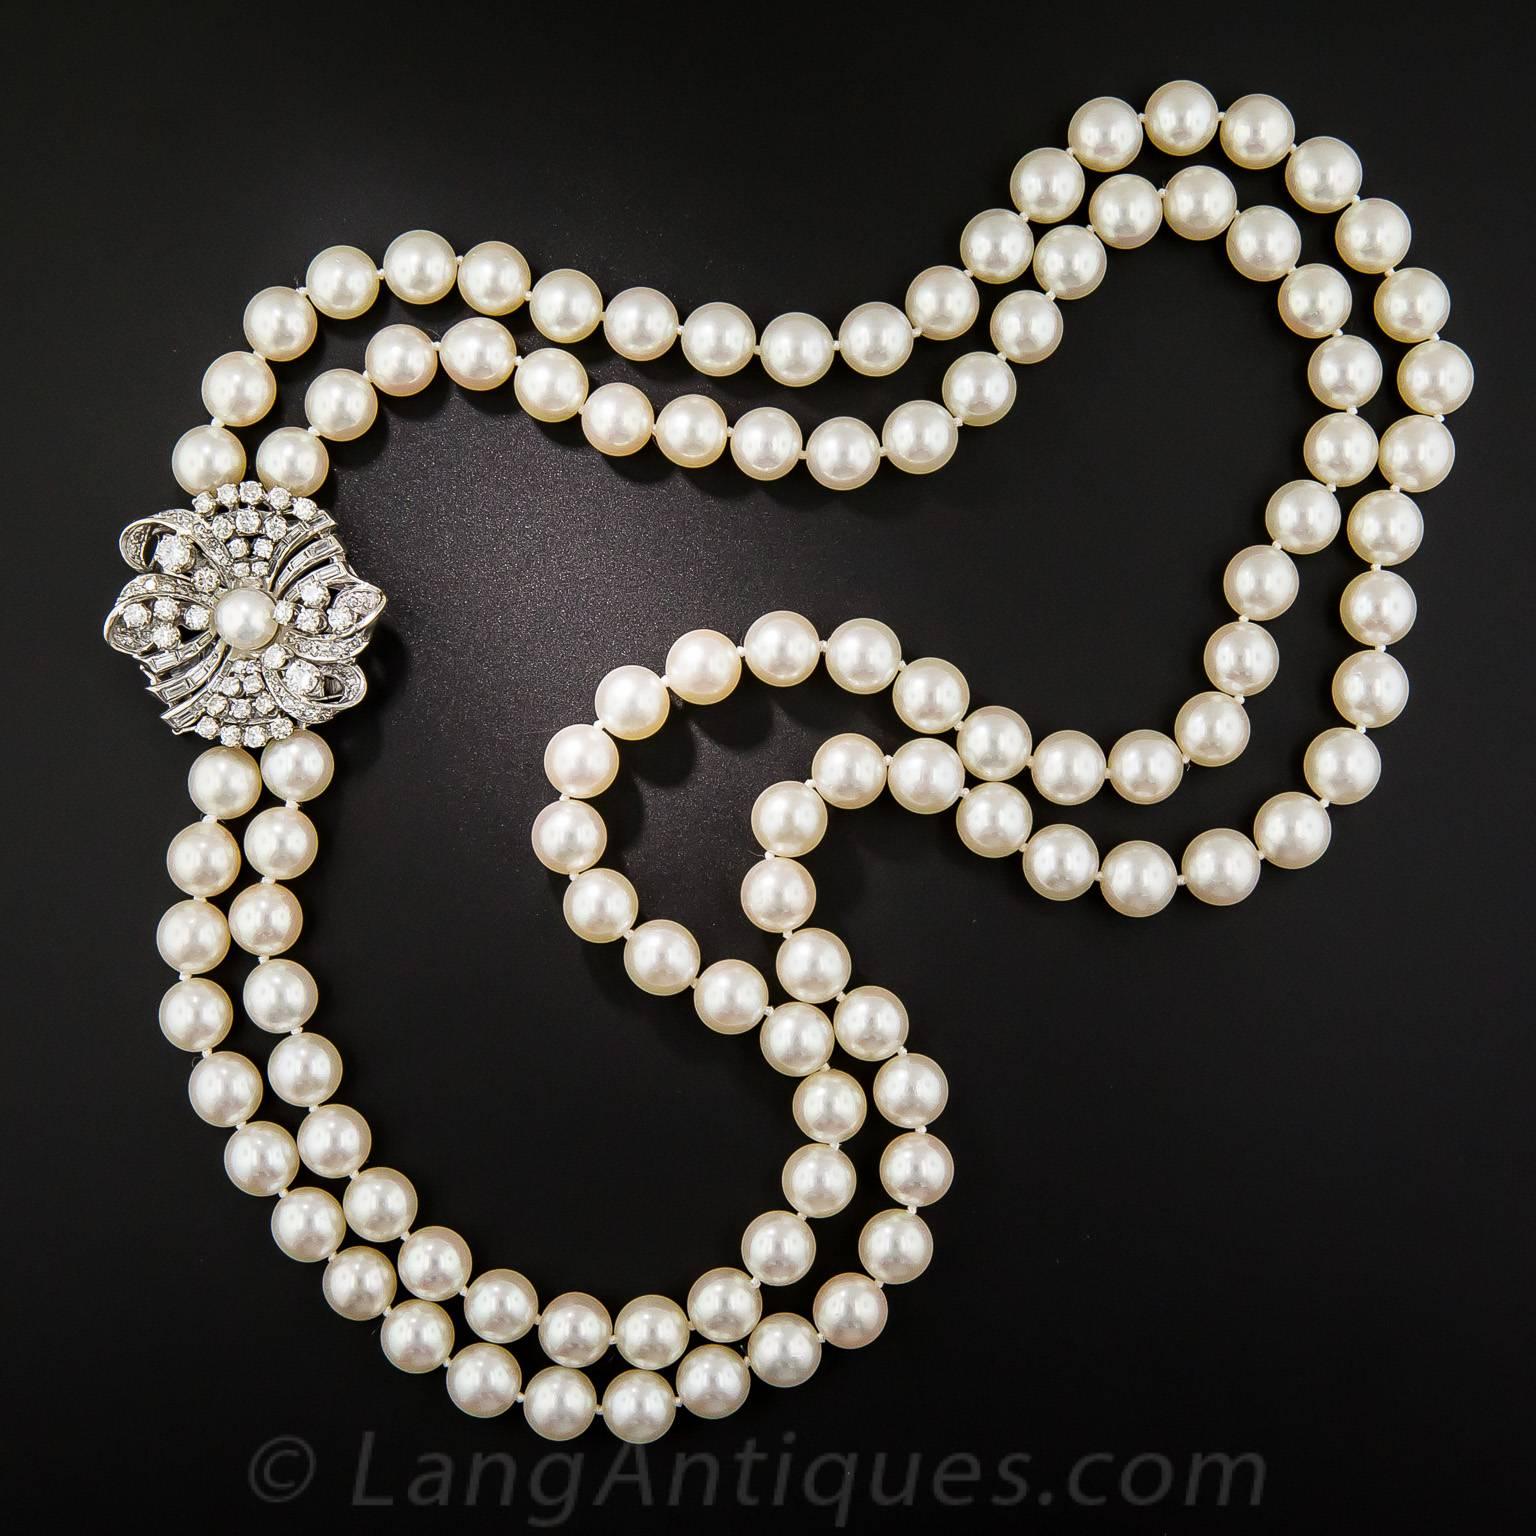 Mid Century Double Strand Cultured Pearl Necklace with Diamond Clasp In Excellent Condition For Sale In San Francisco, CA